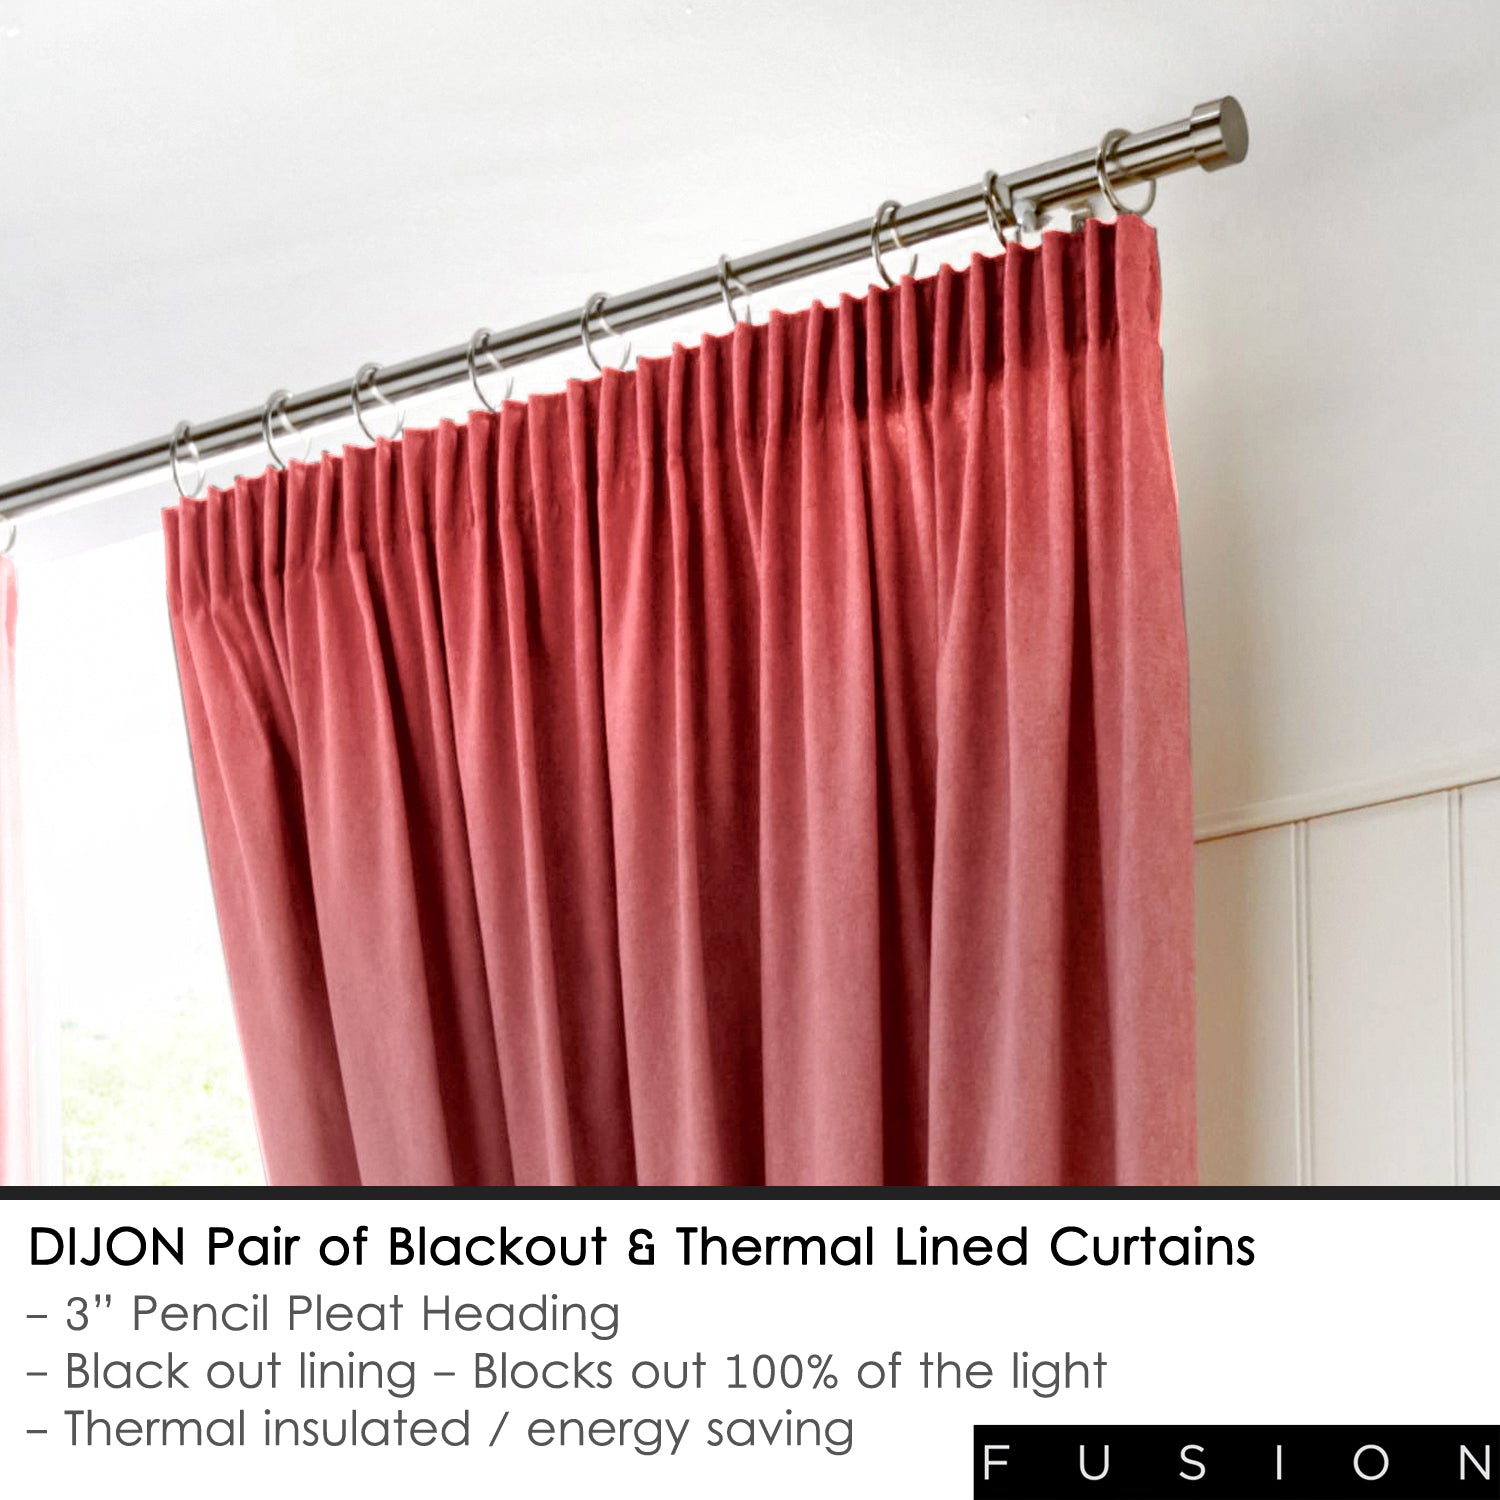 Dijon - Blackout Pair of Pencil Pleat Curtains in Blush - by Fusion